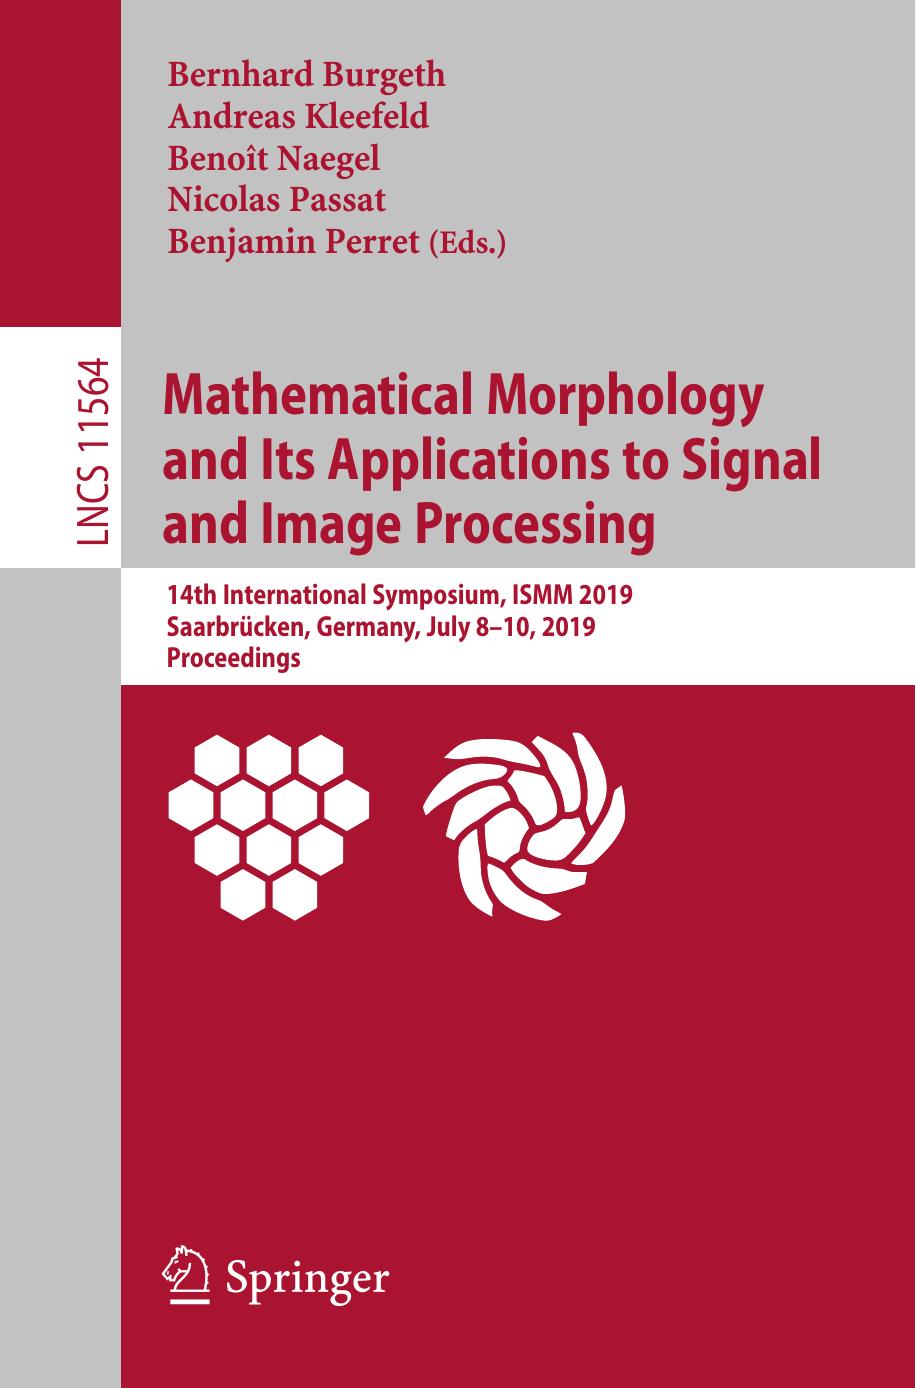 Mathematical Morphology and Its Applications to Signal and Image Processing: 14th International Symposium, ISMM 2019, Saarbrücken, Germany, July 8-10, 2019, Proceedings